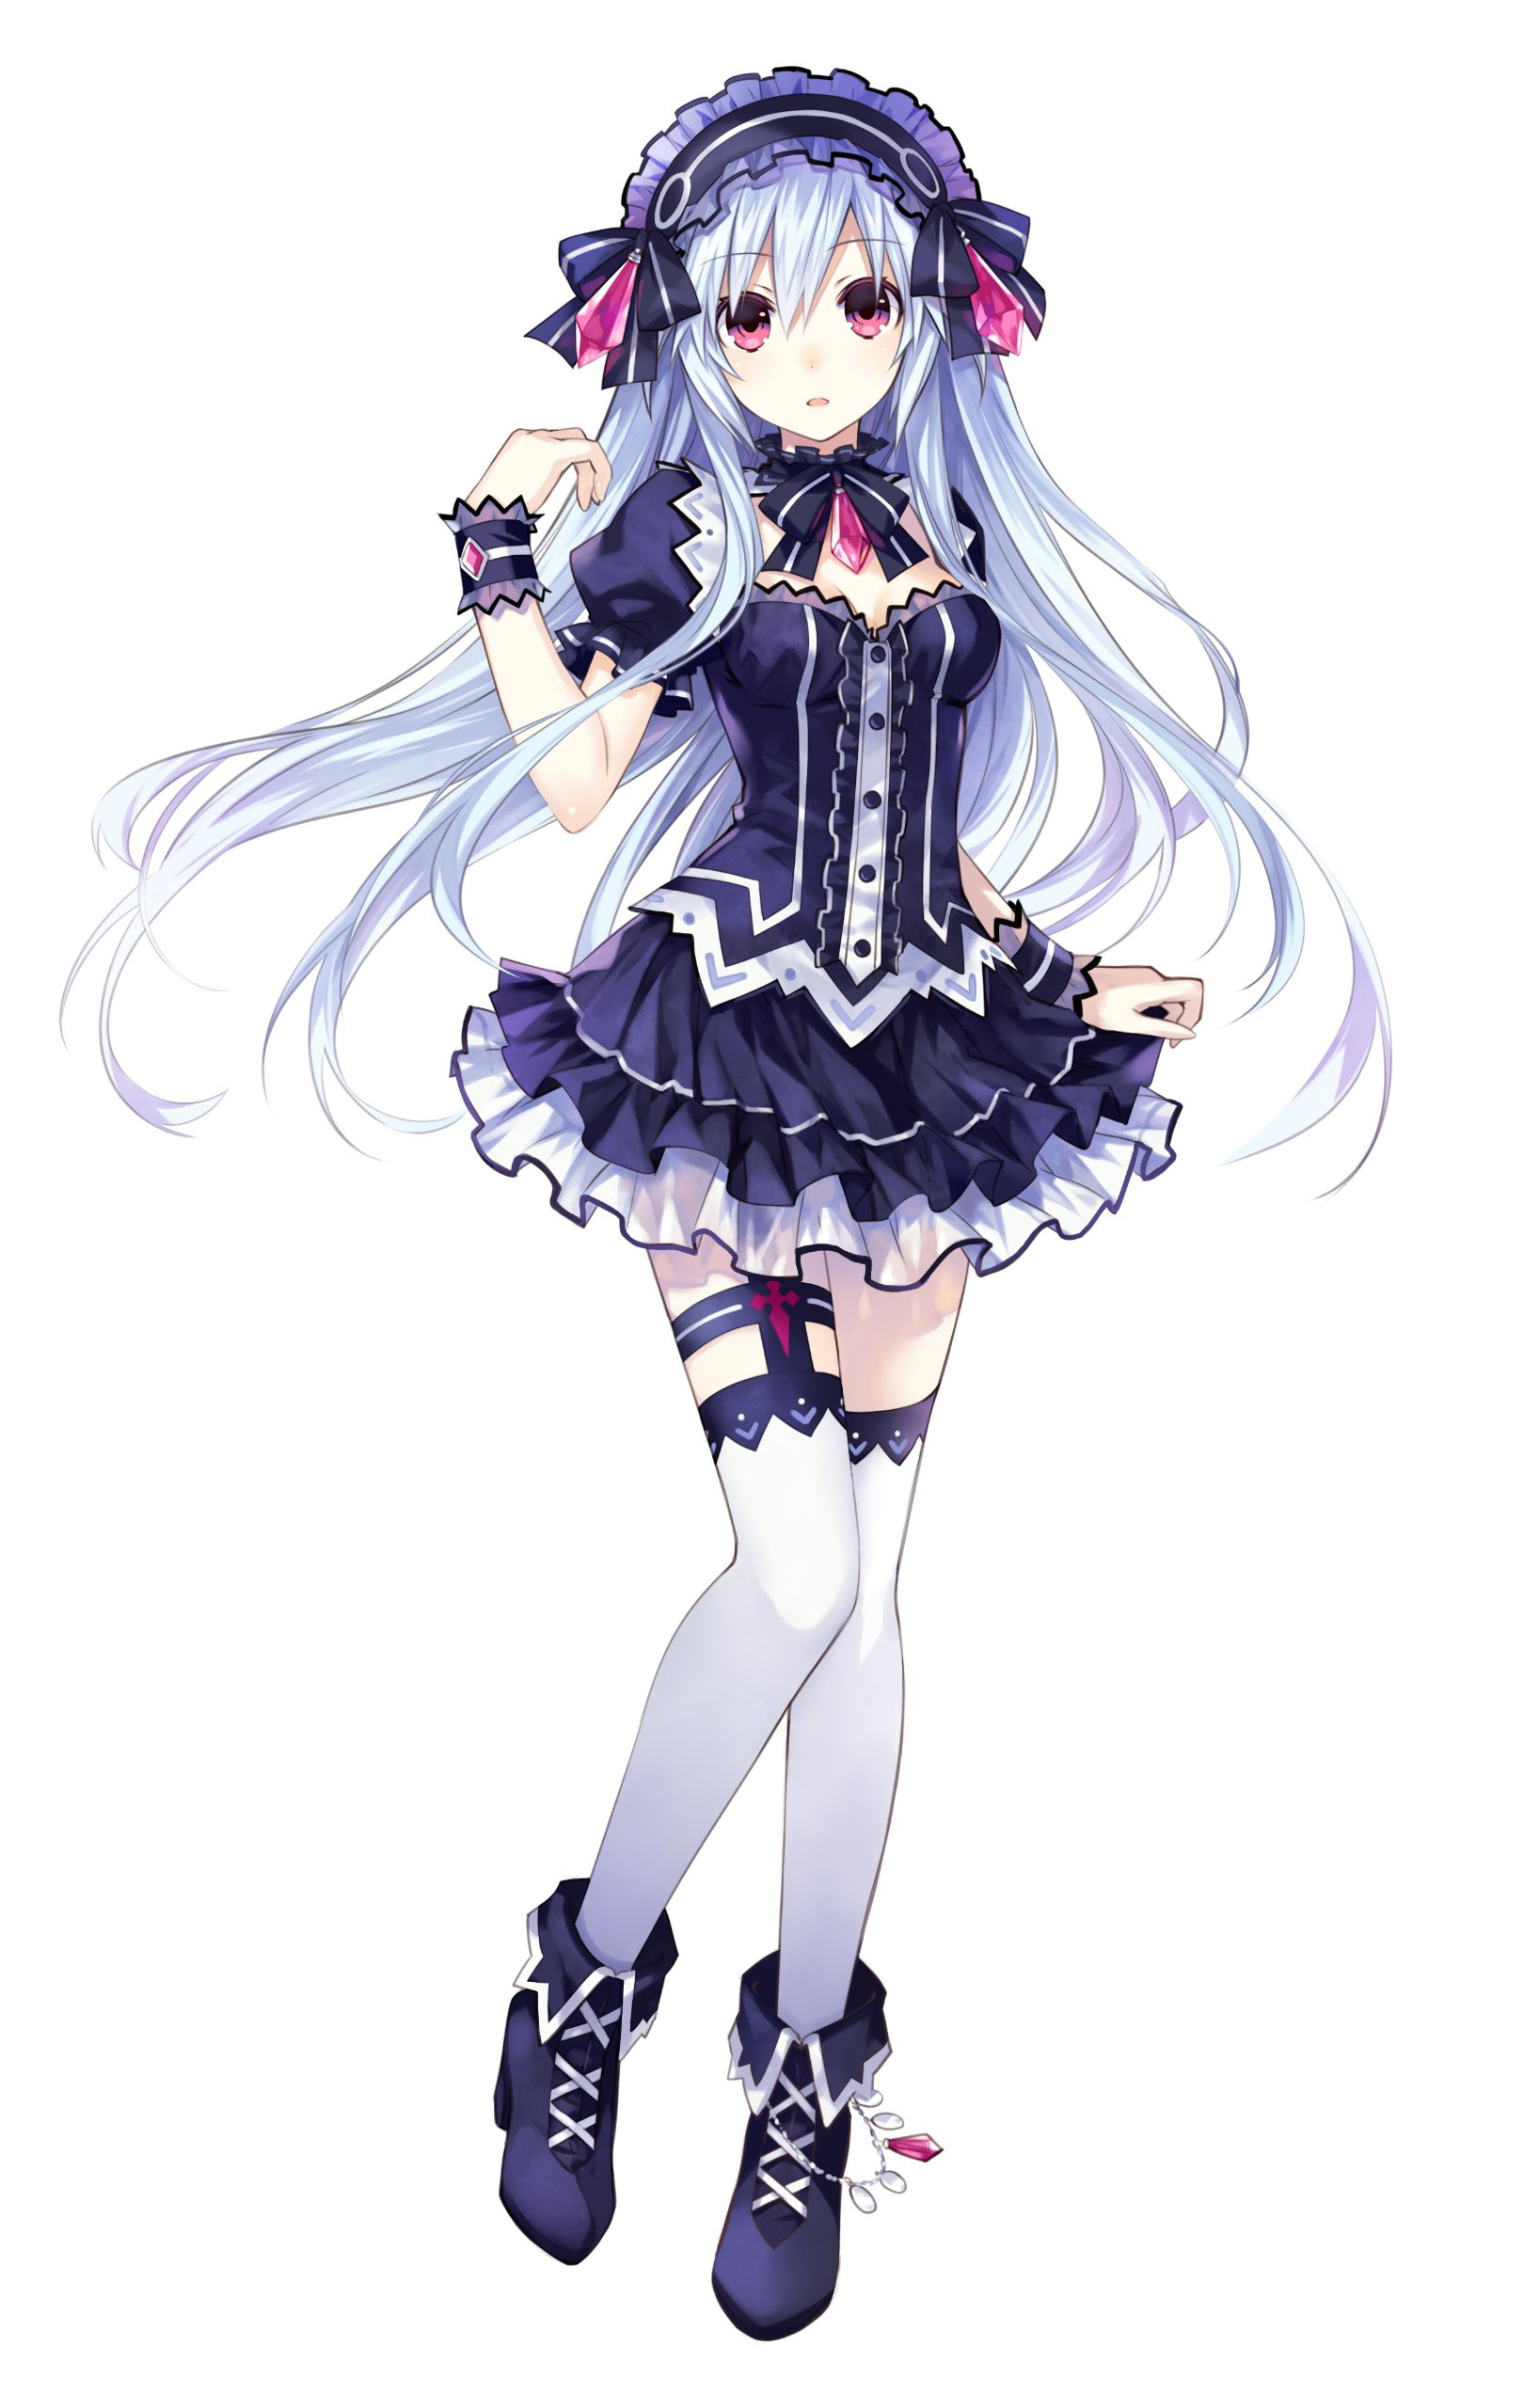 Images of Fairy Fencer F | 1620x2560